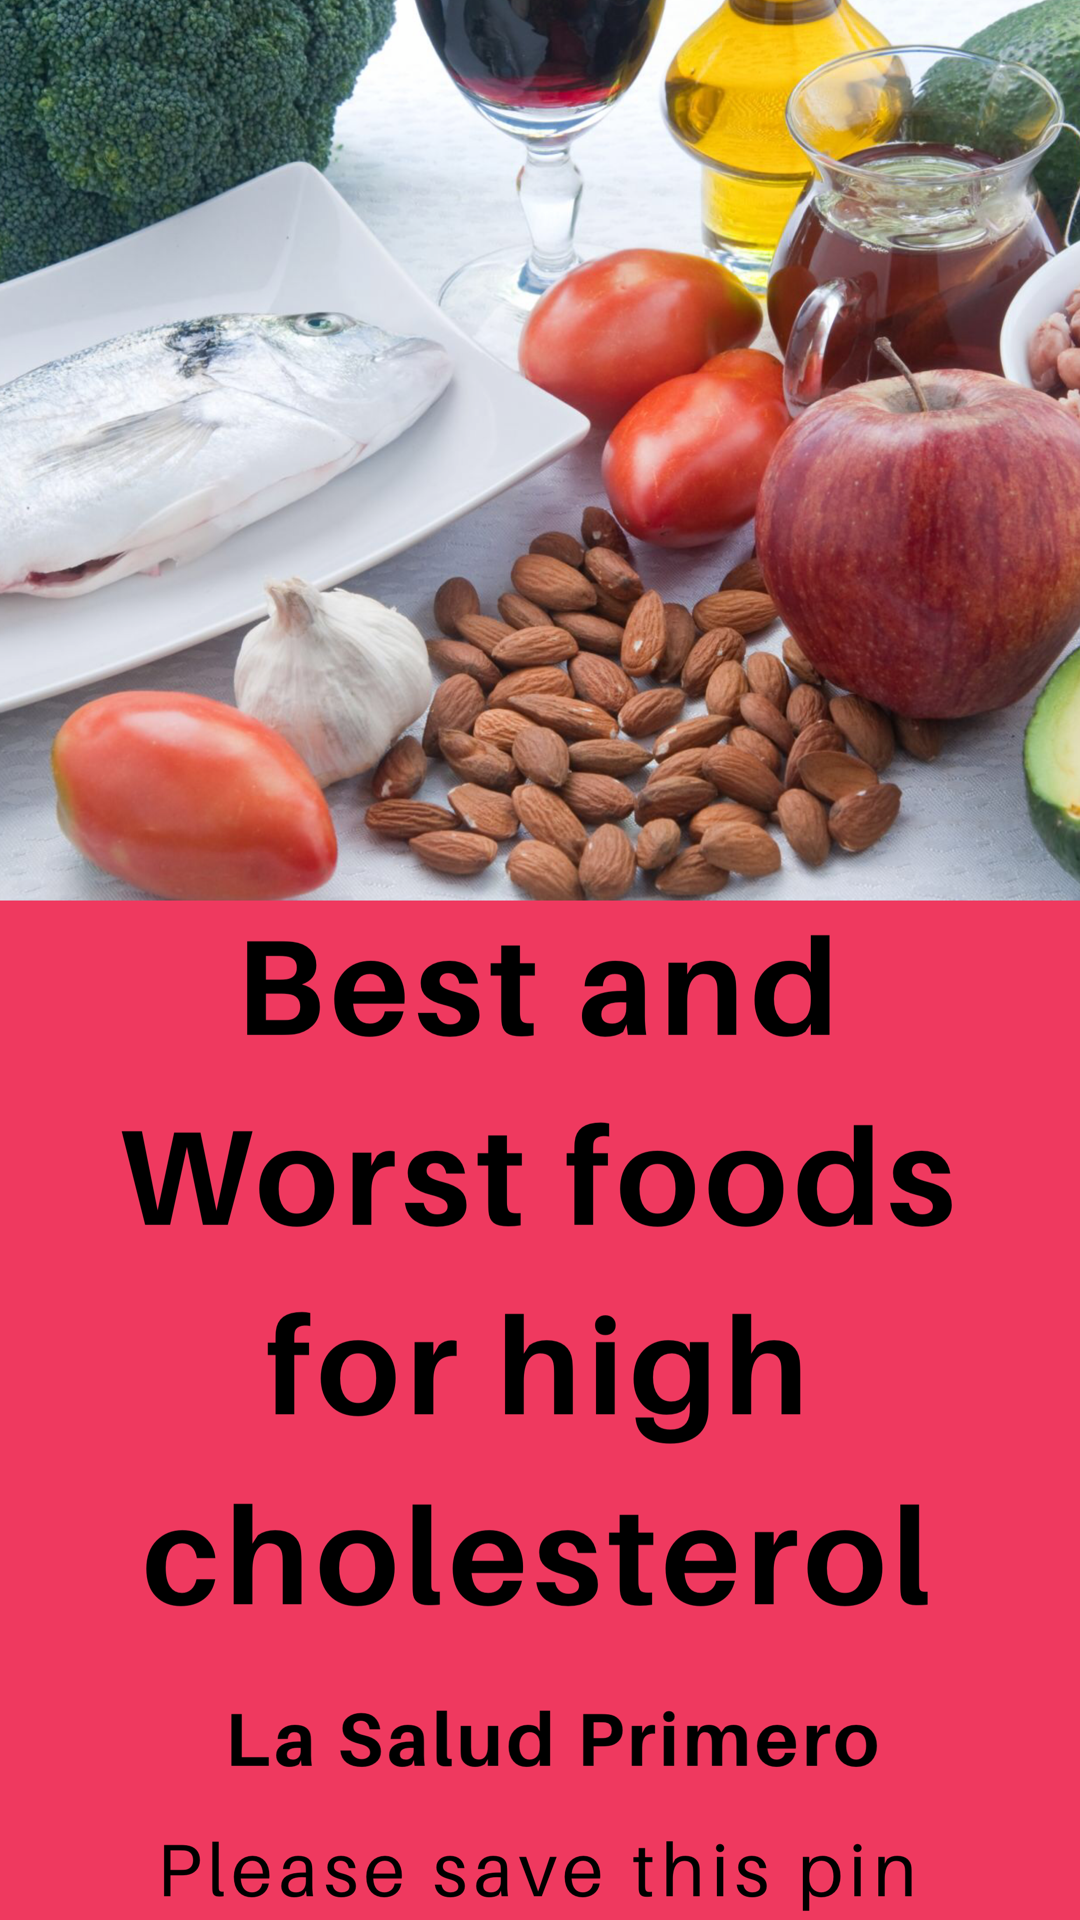 Best and worse foods for high cholesterol